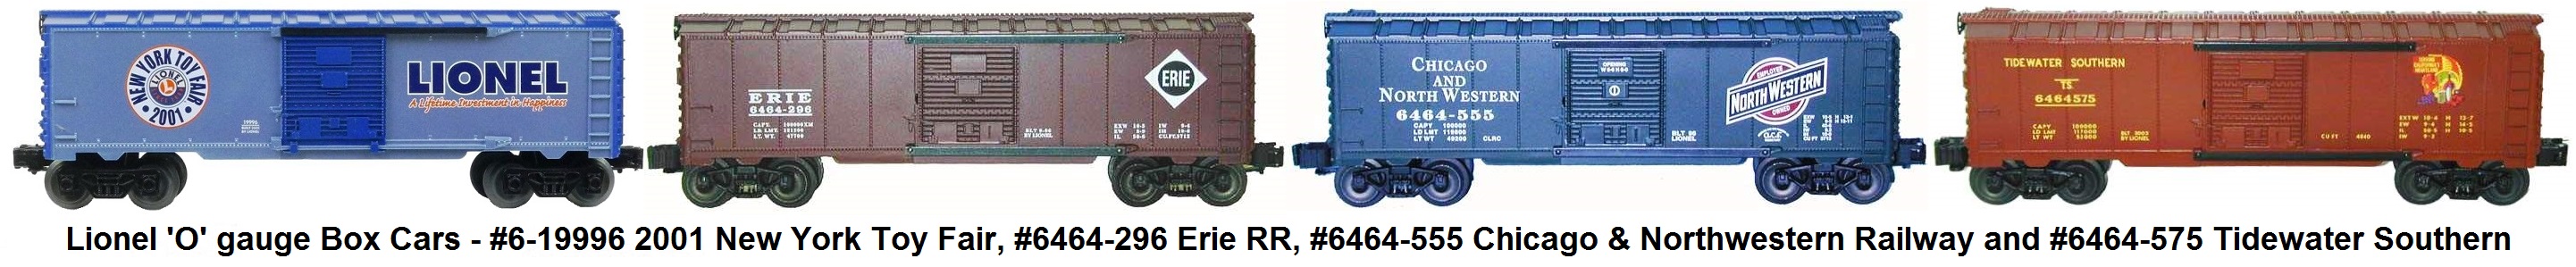 Lionel 'O' gauge #6-19996 2001 New York Toy Fair, #6464-296 Erie, #6464-555 Chicago & Northwestern and #6464-575 Tidewater Southern Box Cars